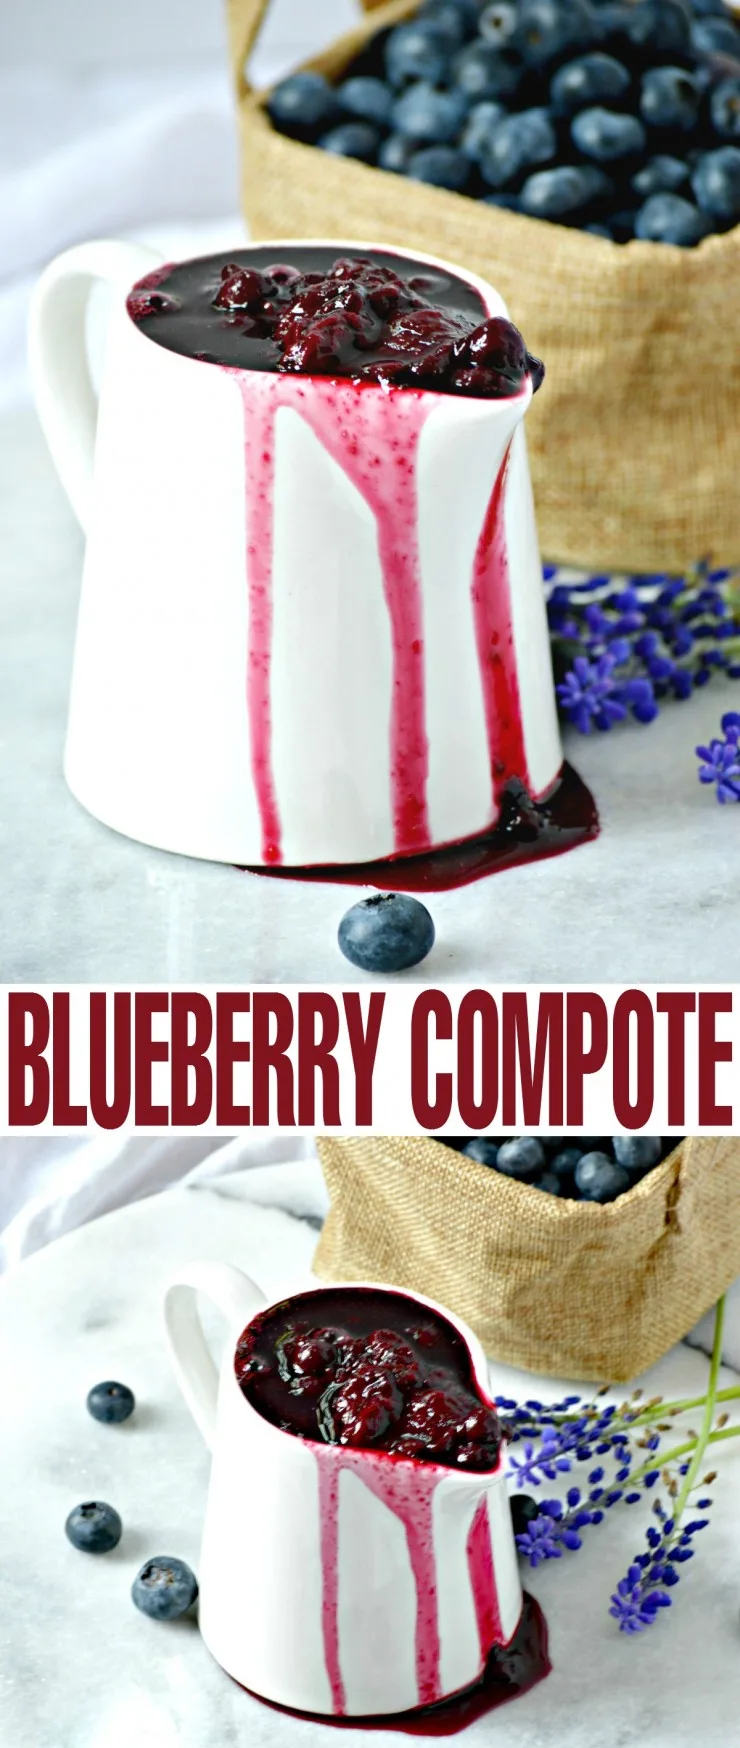 This Blueberry Compote recipe is perfect served over pancakes, ice cream, yoghurt, pound cake, cheesecake. The options are as endless as they are delicious!